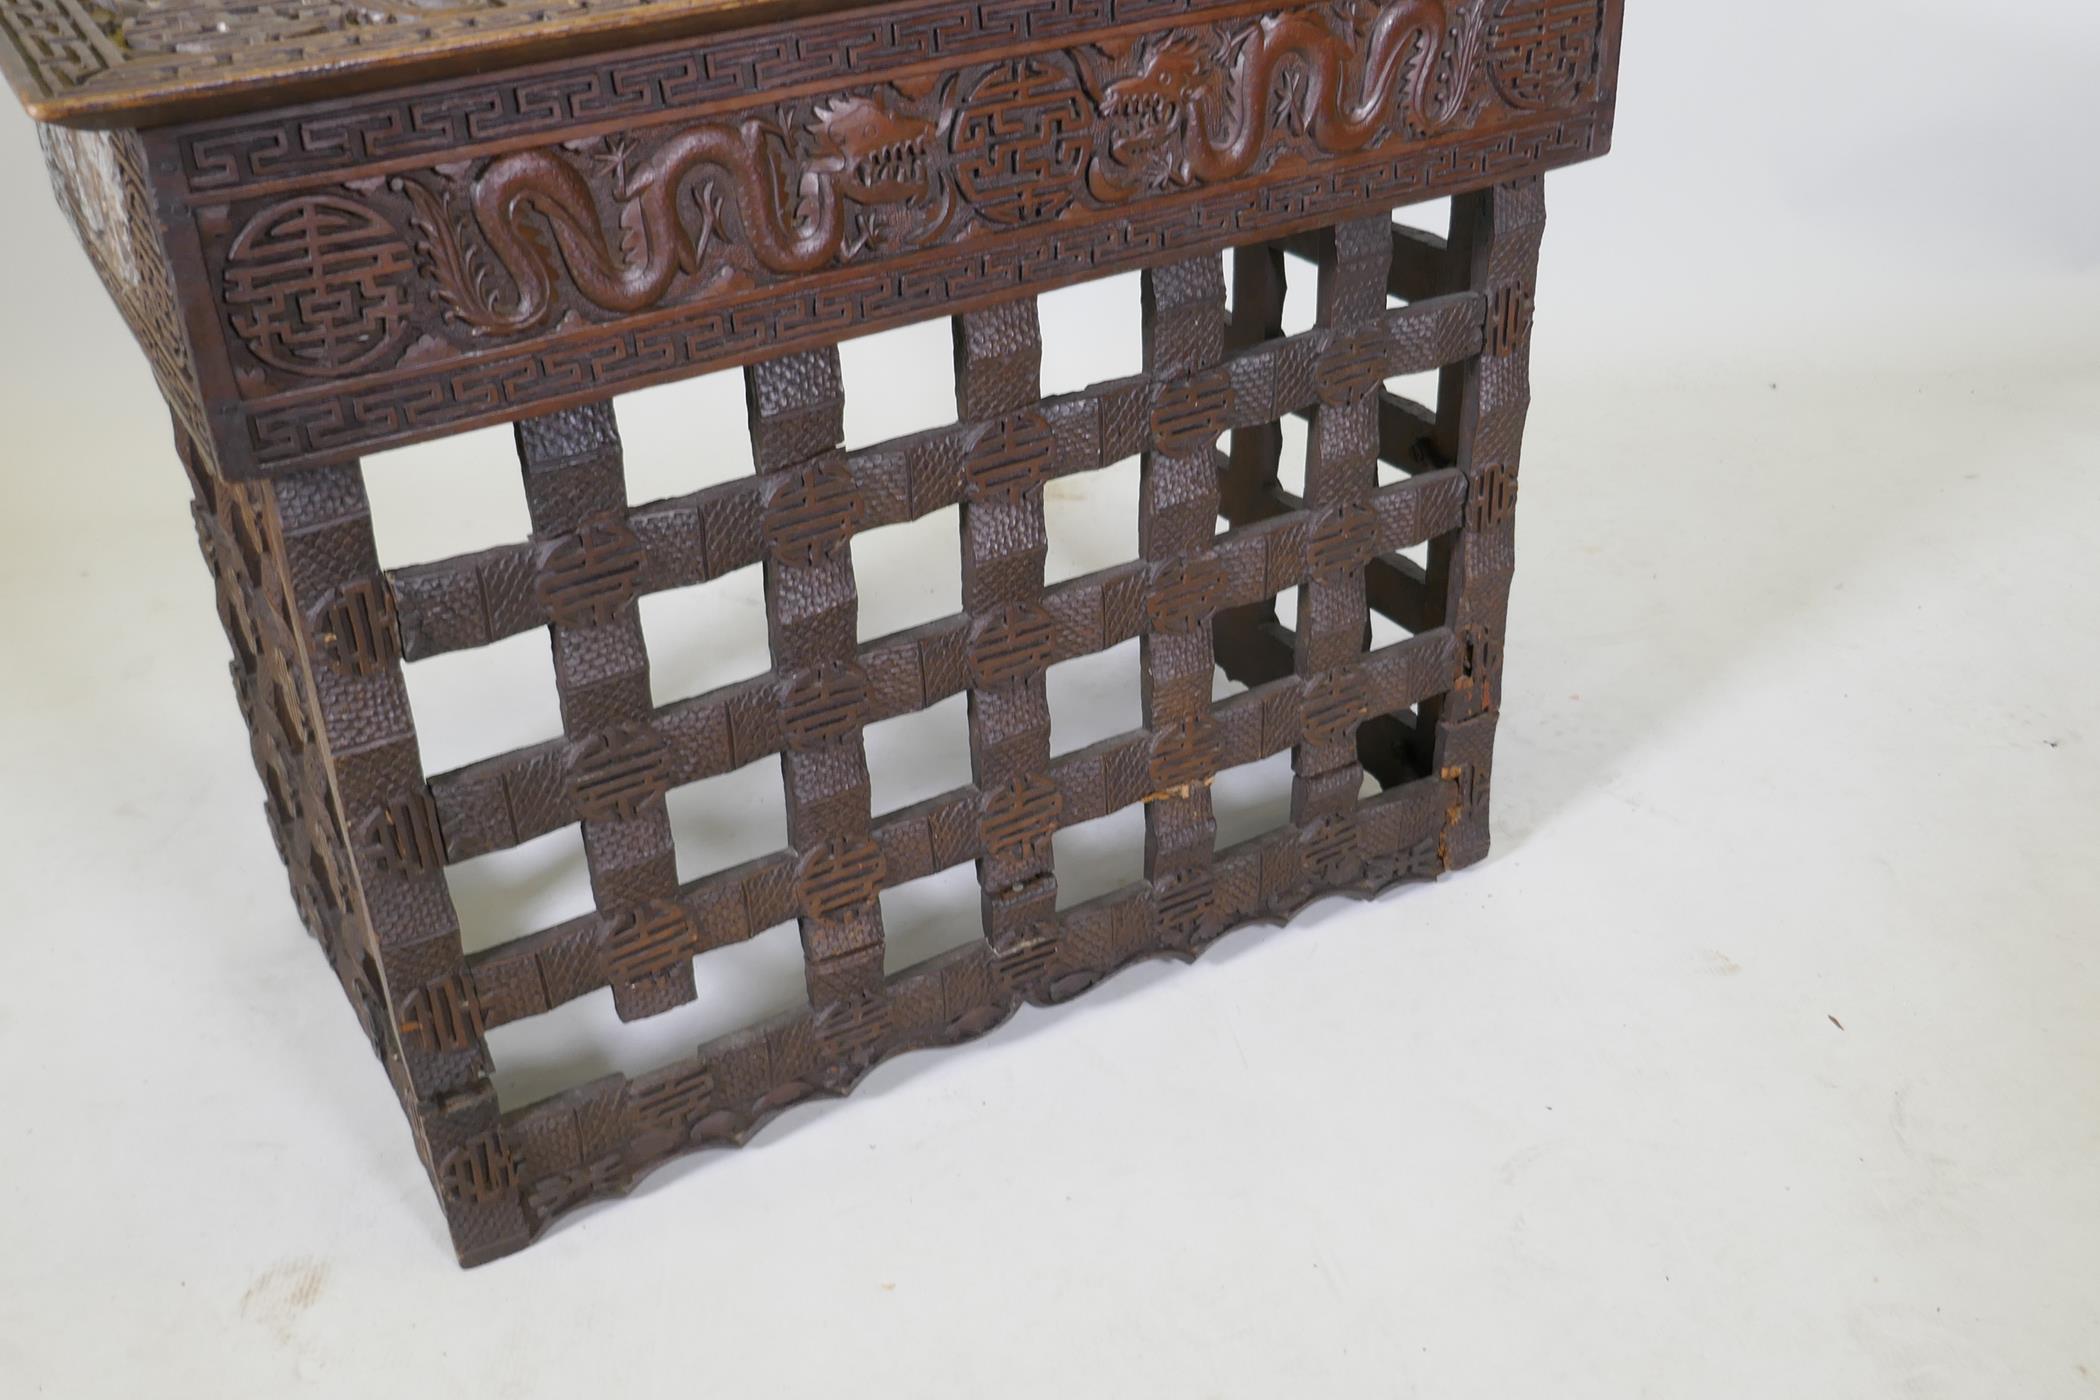 A C19th Chinese carved hardwood travel desk with a pierced folding base, decorated with dragons - Image 4 of 7